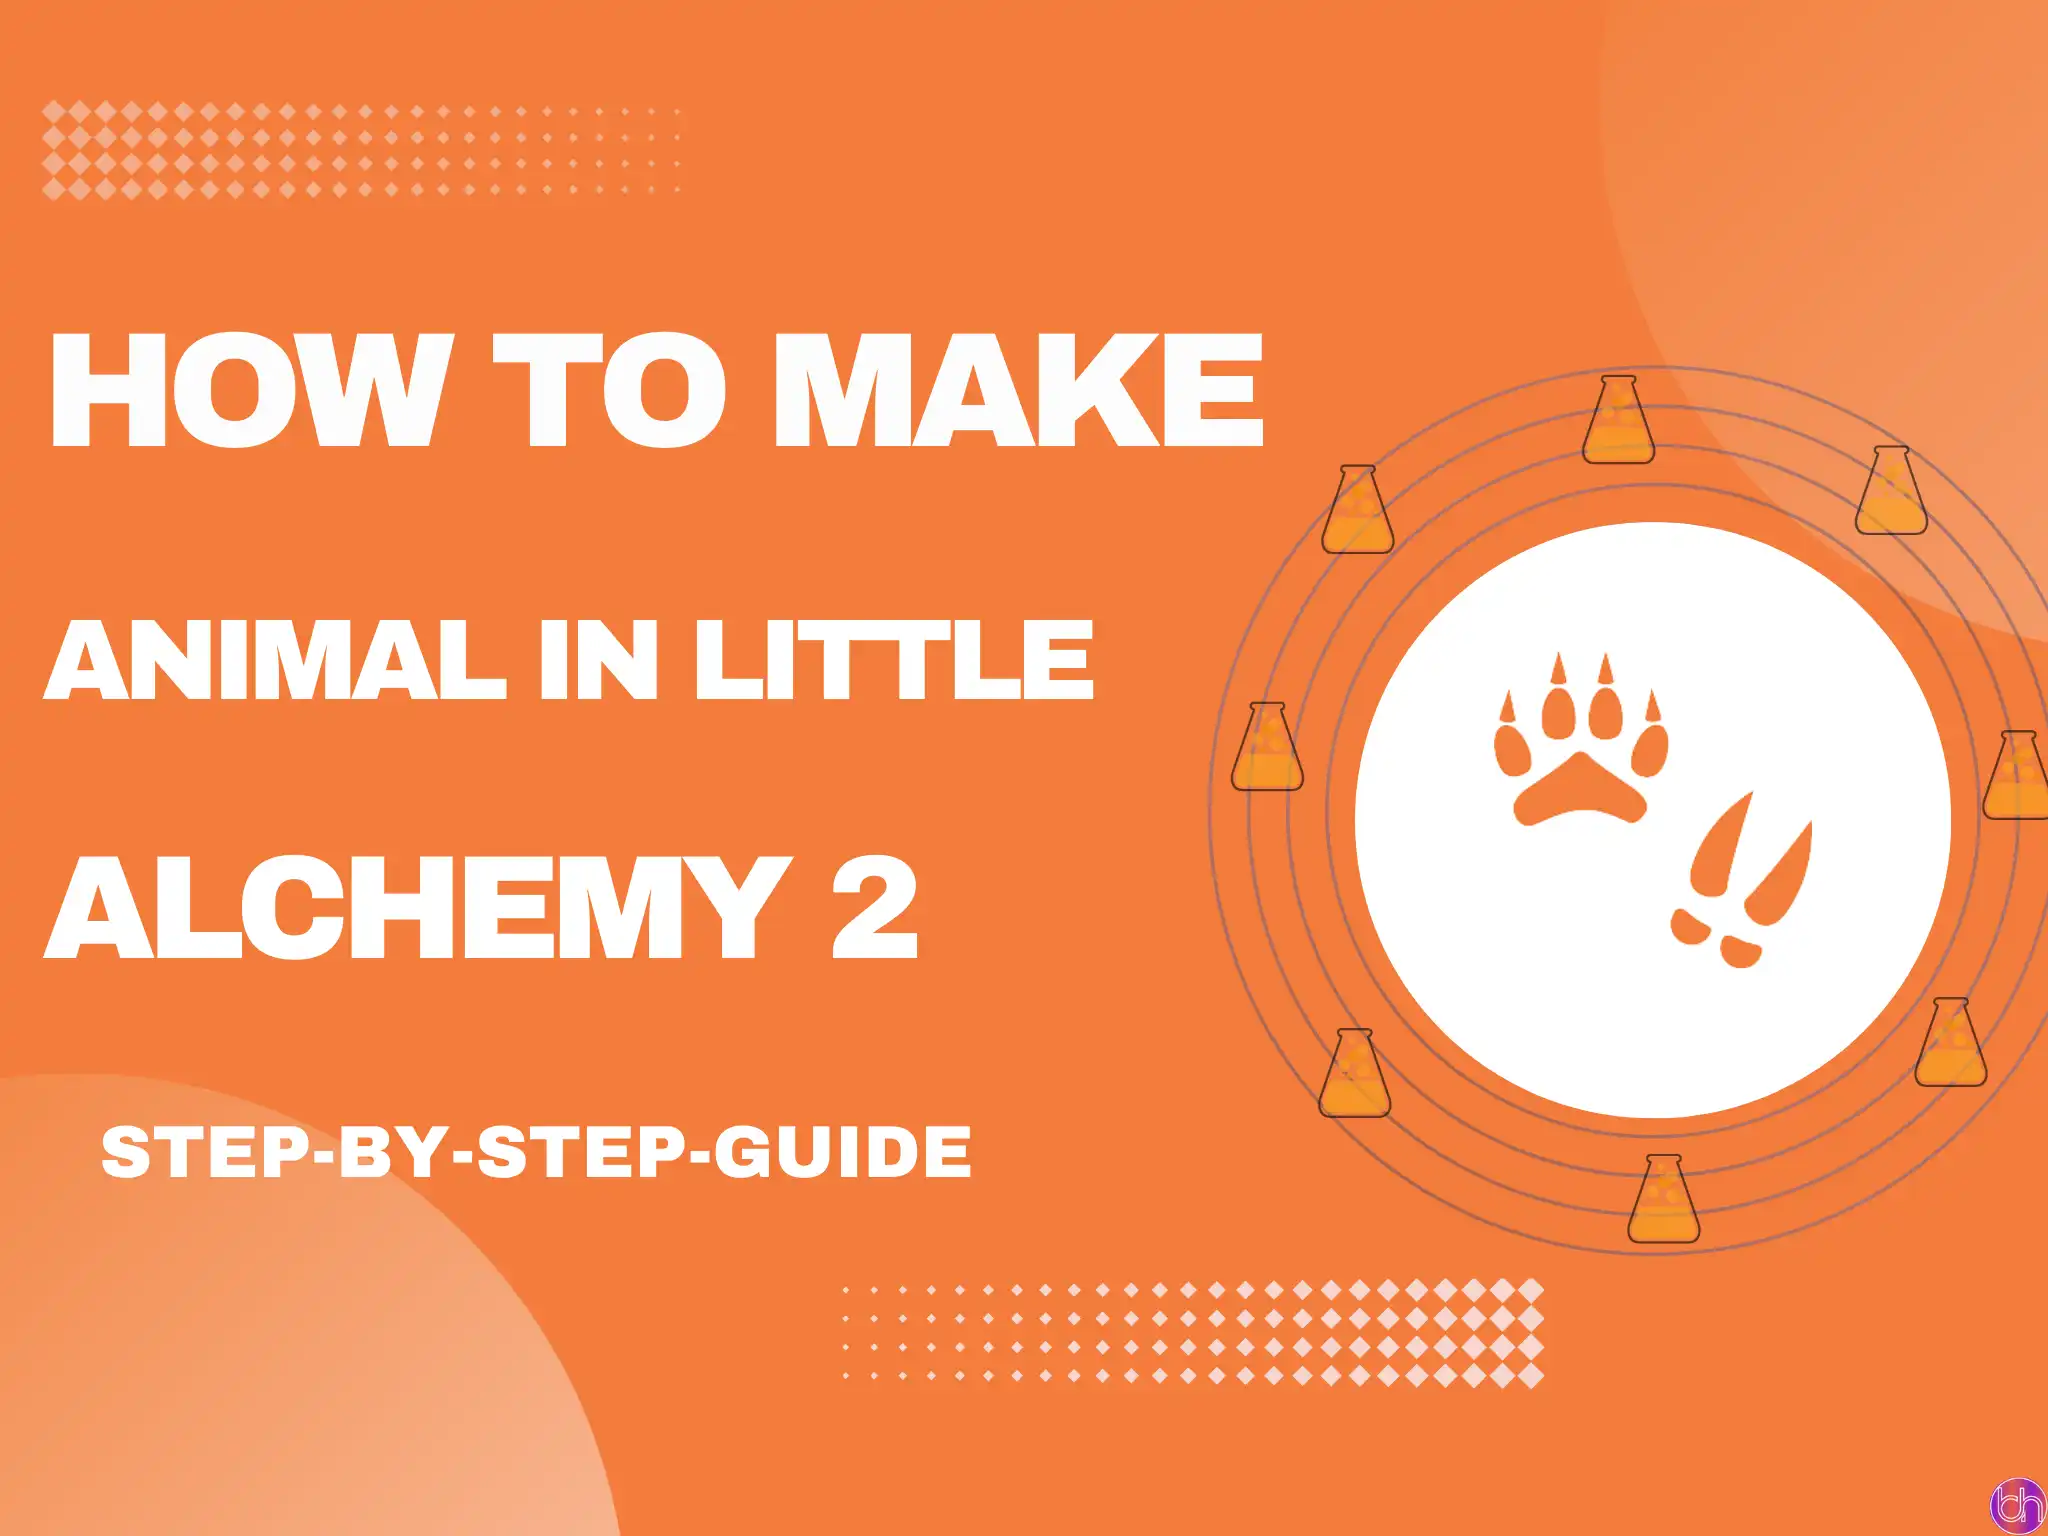 How to make Animal in little alchemy 2